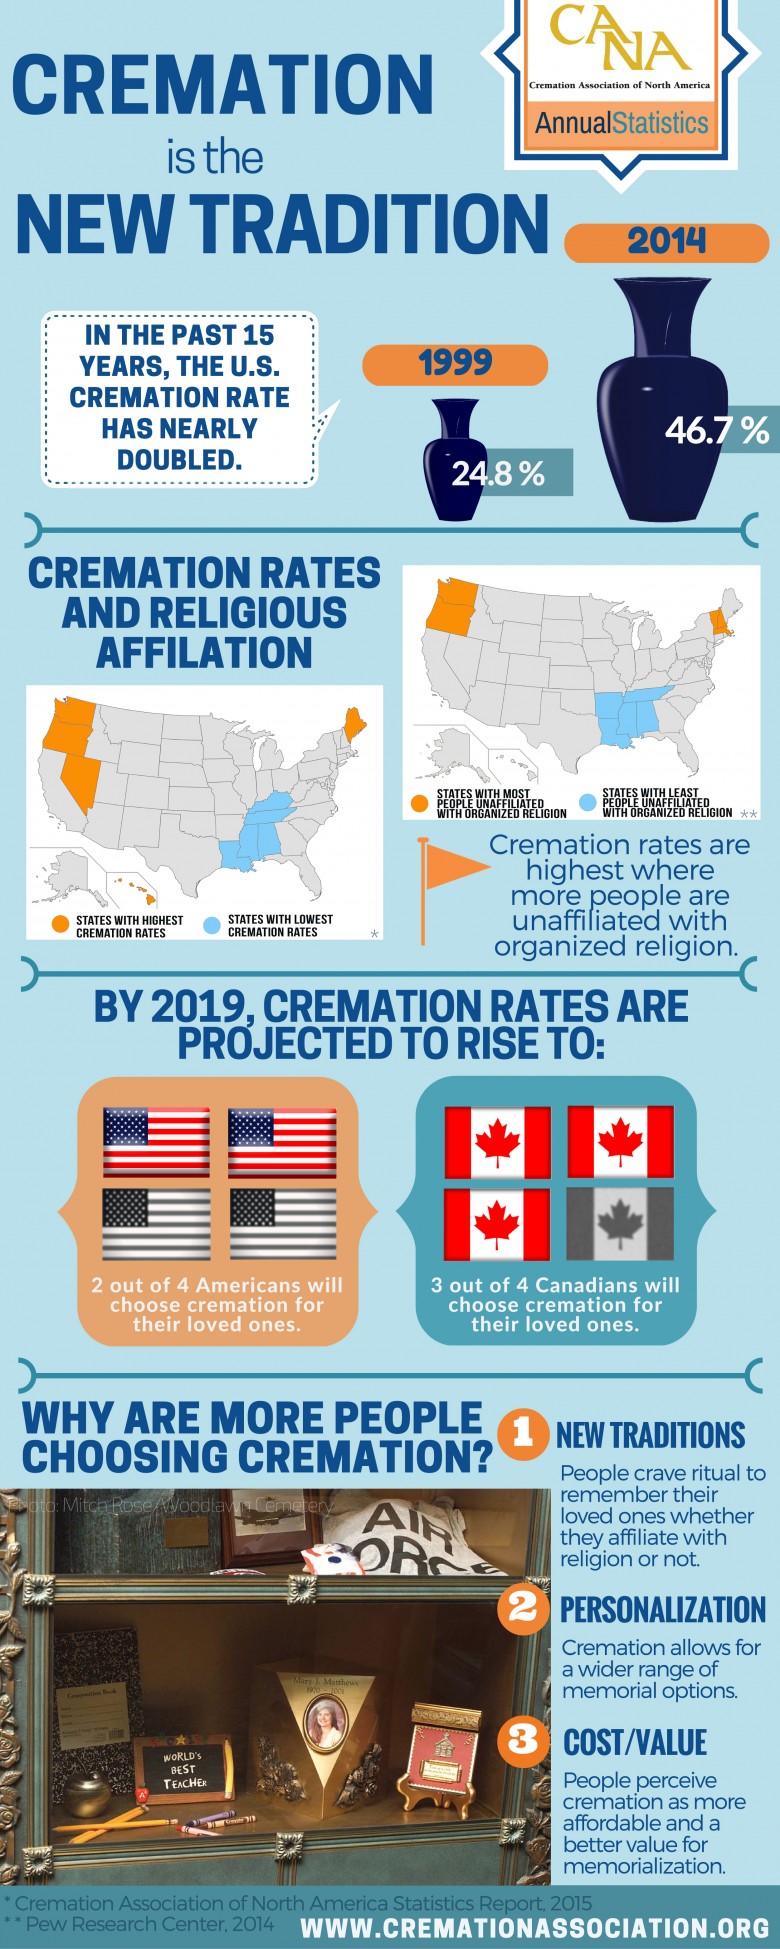 Cremation is the new tradition, CANA 2015 annual statistics